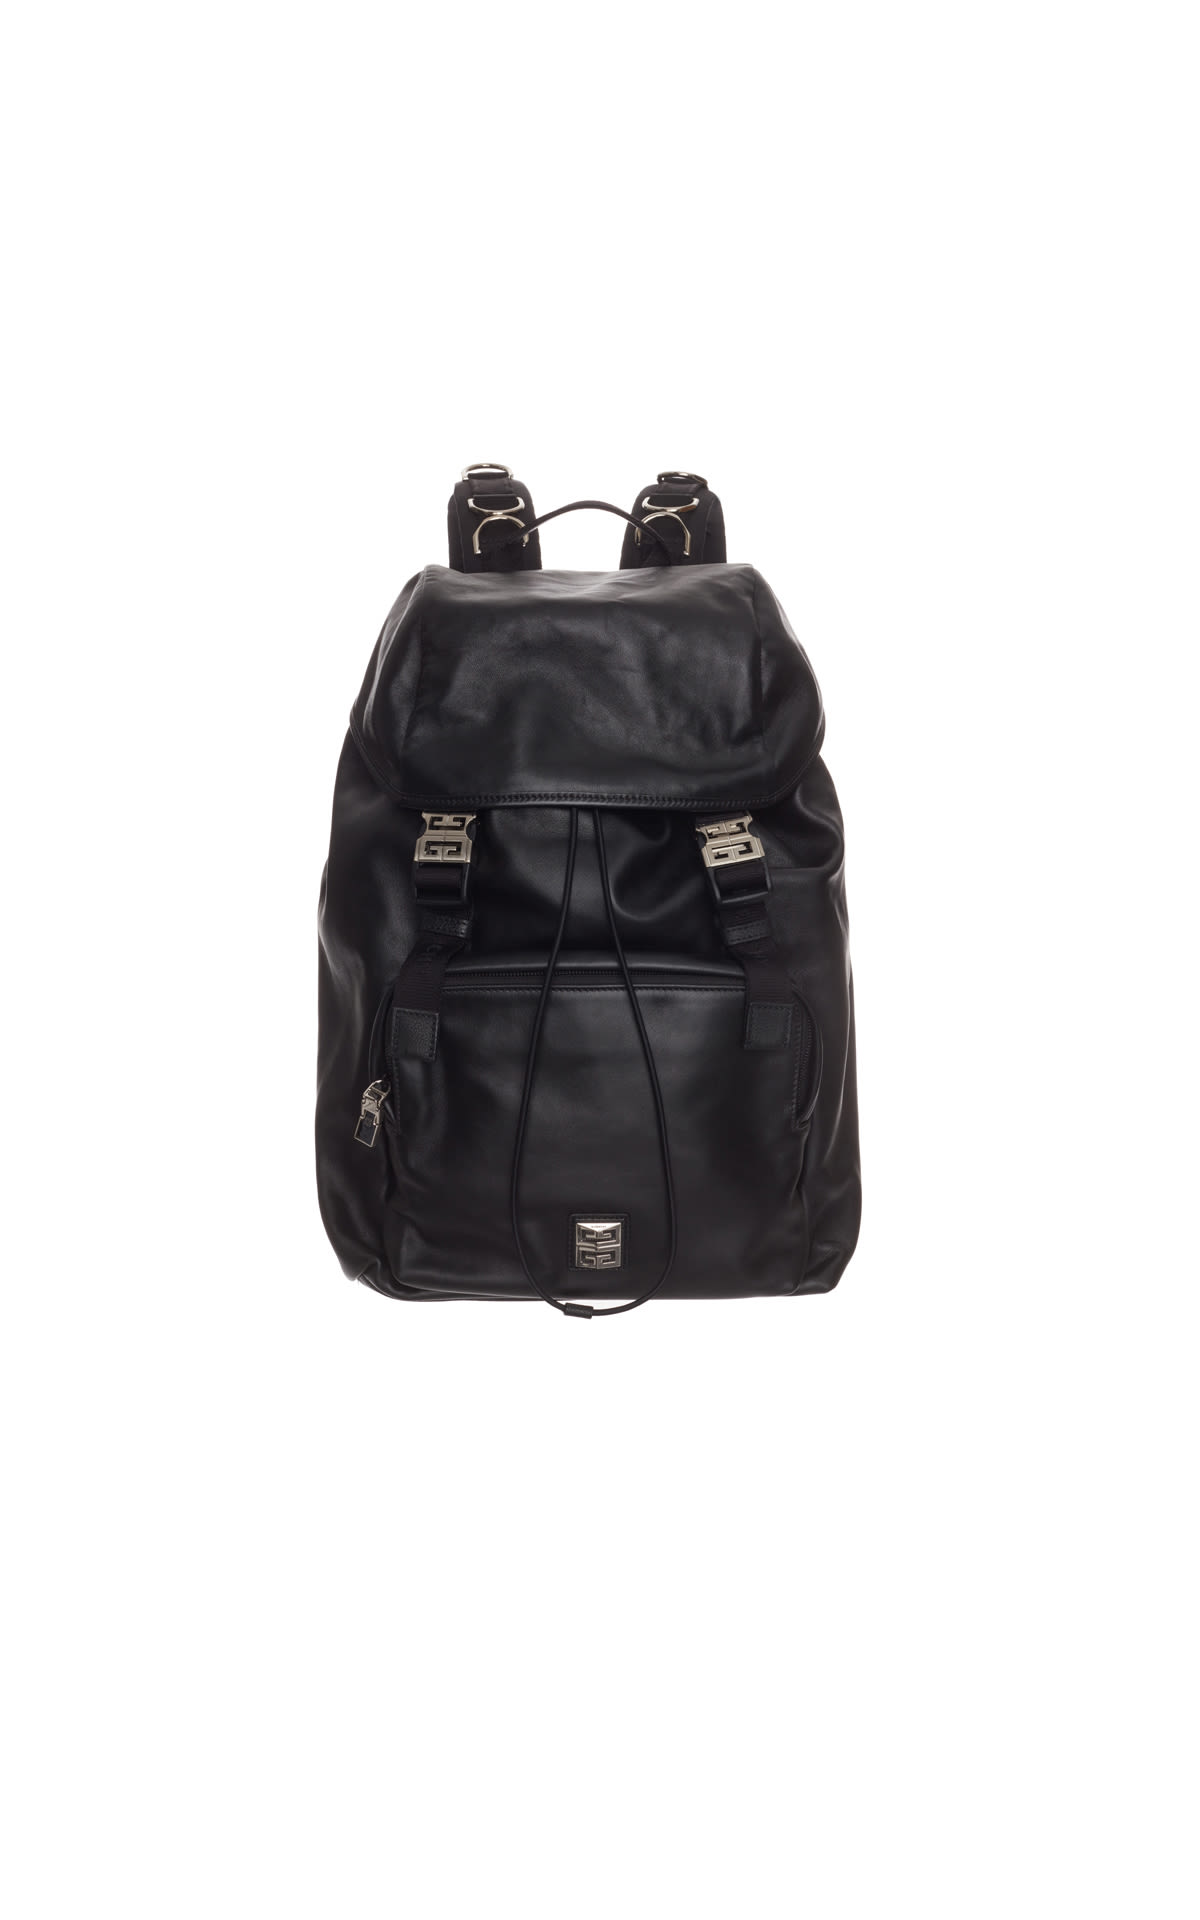 Givenchy leather backpack from Bicester Village